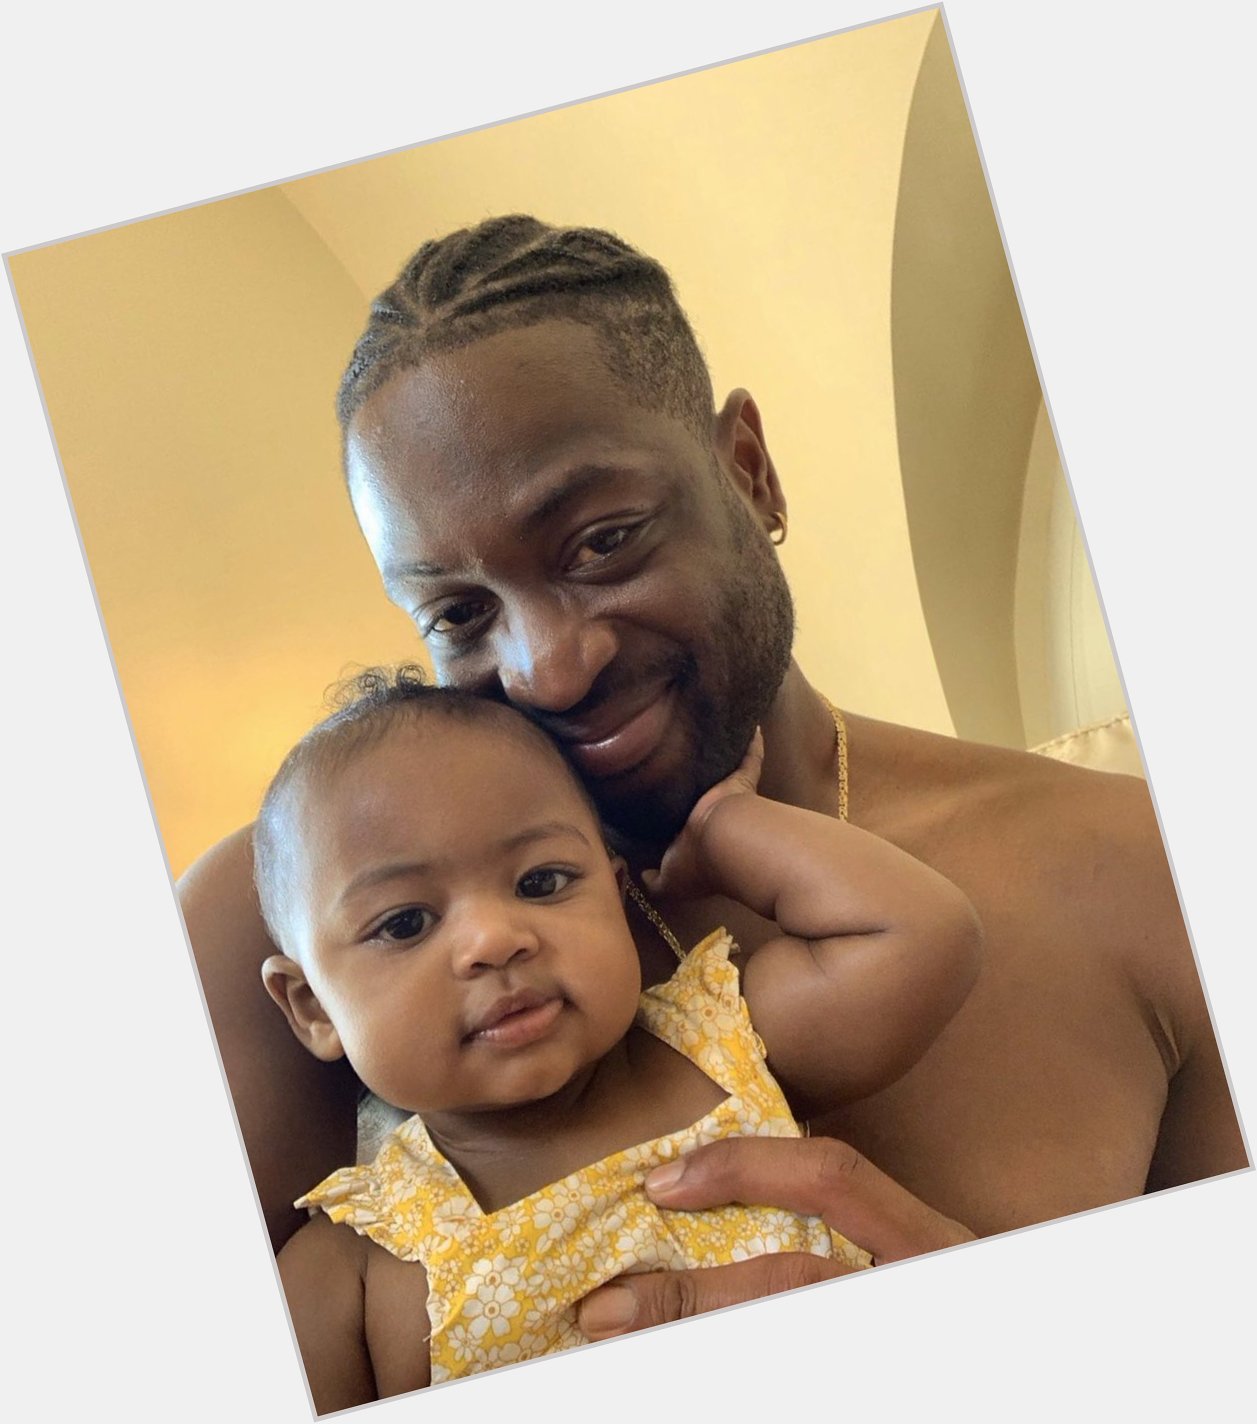 Happy 1st Birthday to DWade & Gabrielle Union-Wade s daughter, Kaavia!  